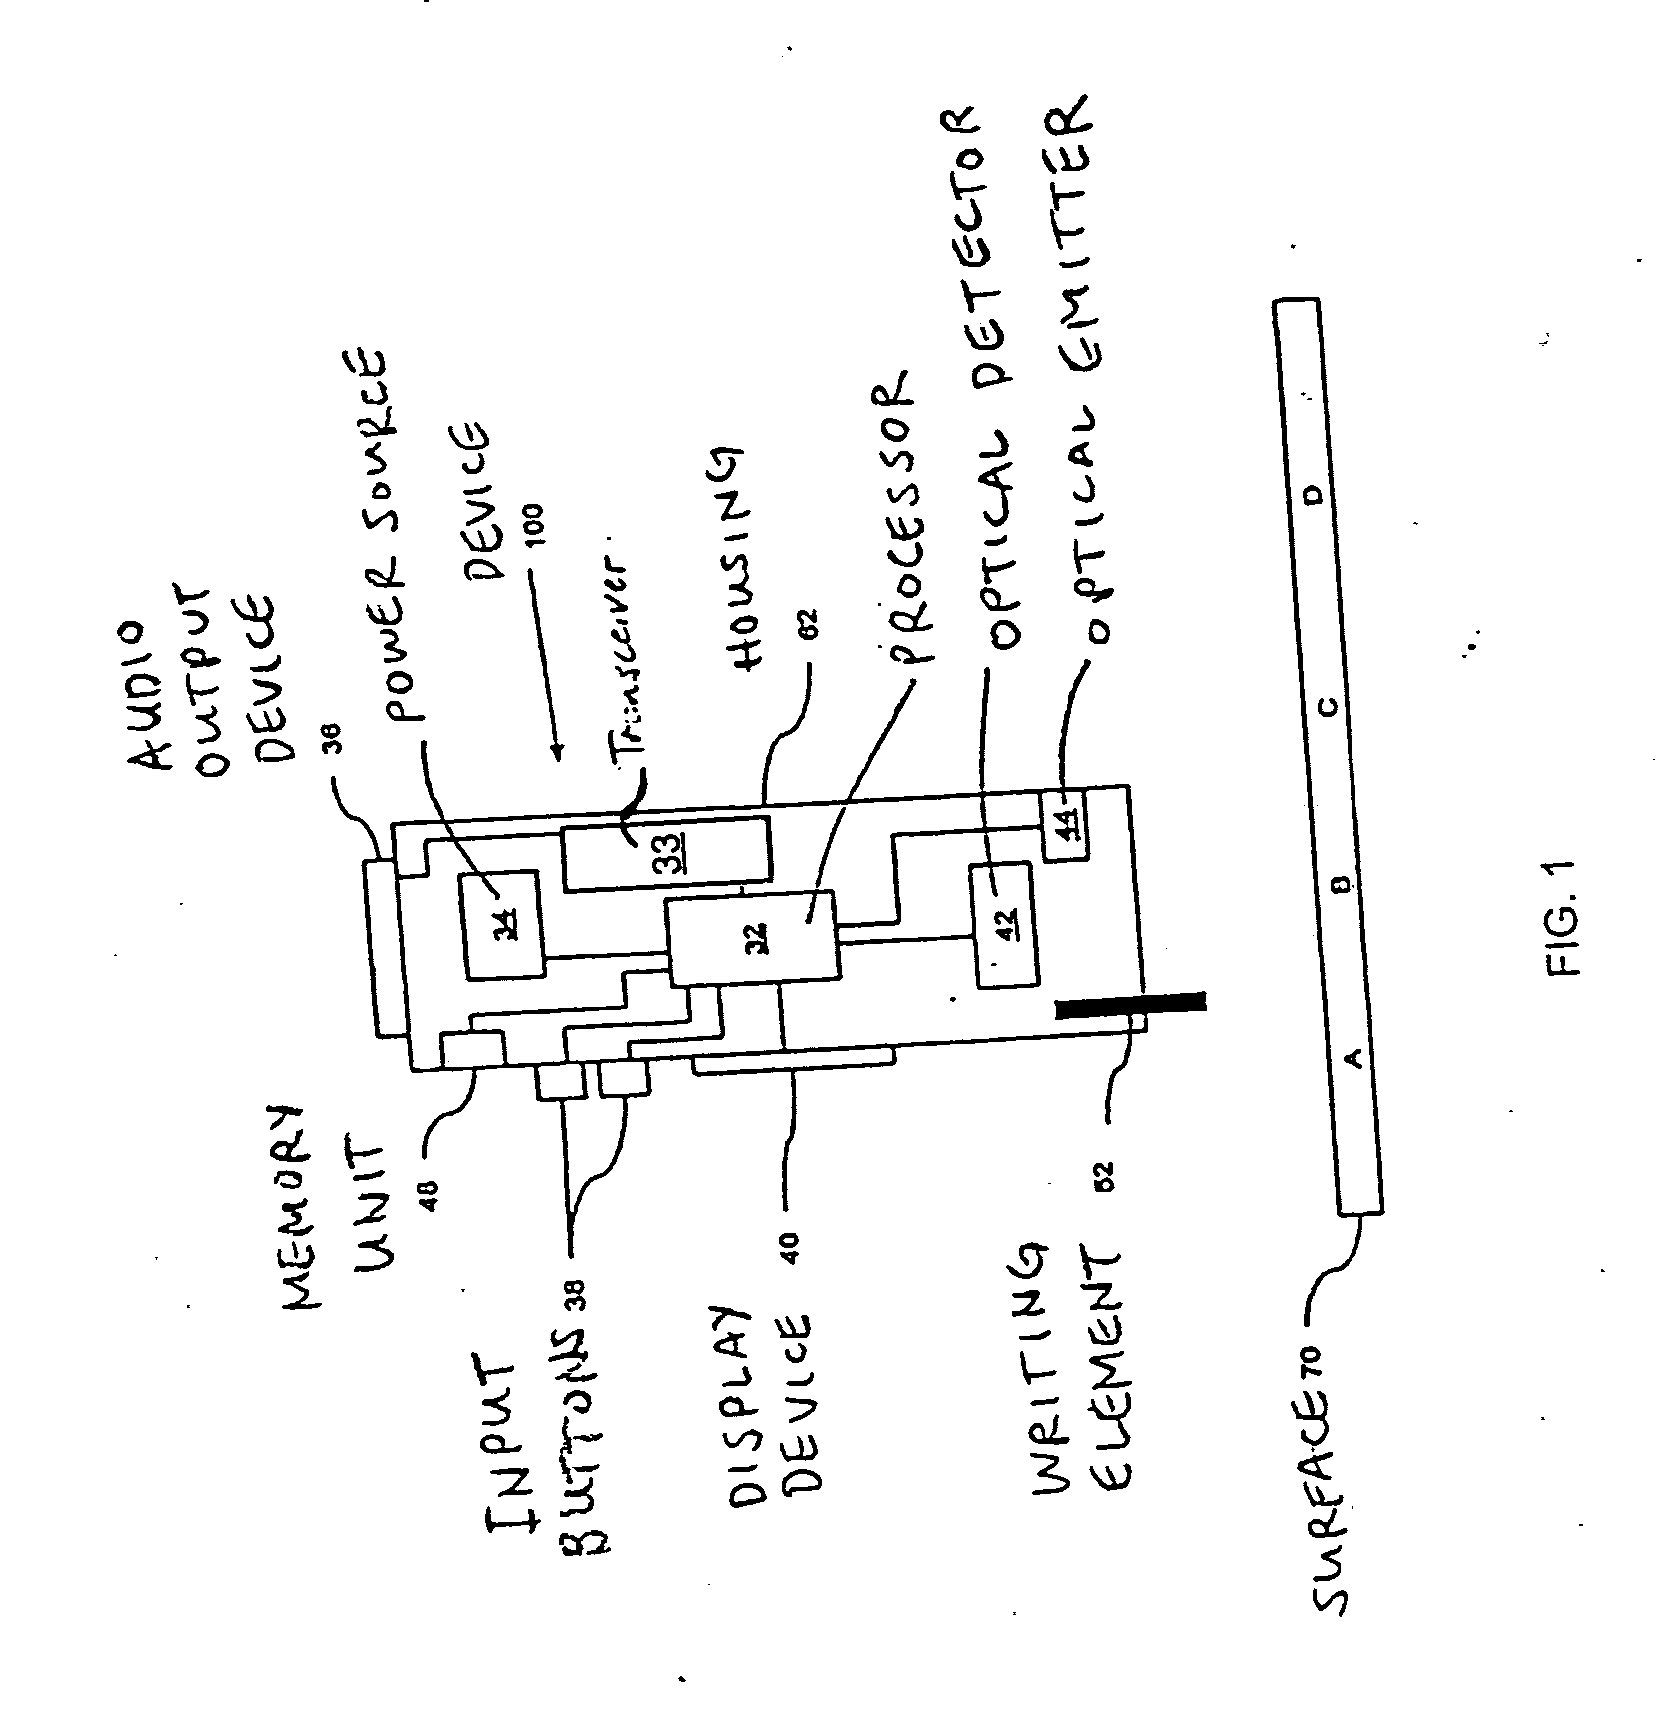 Method and system for conducting a transaction using recognized text